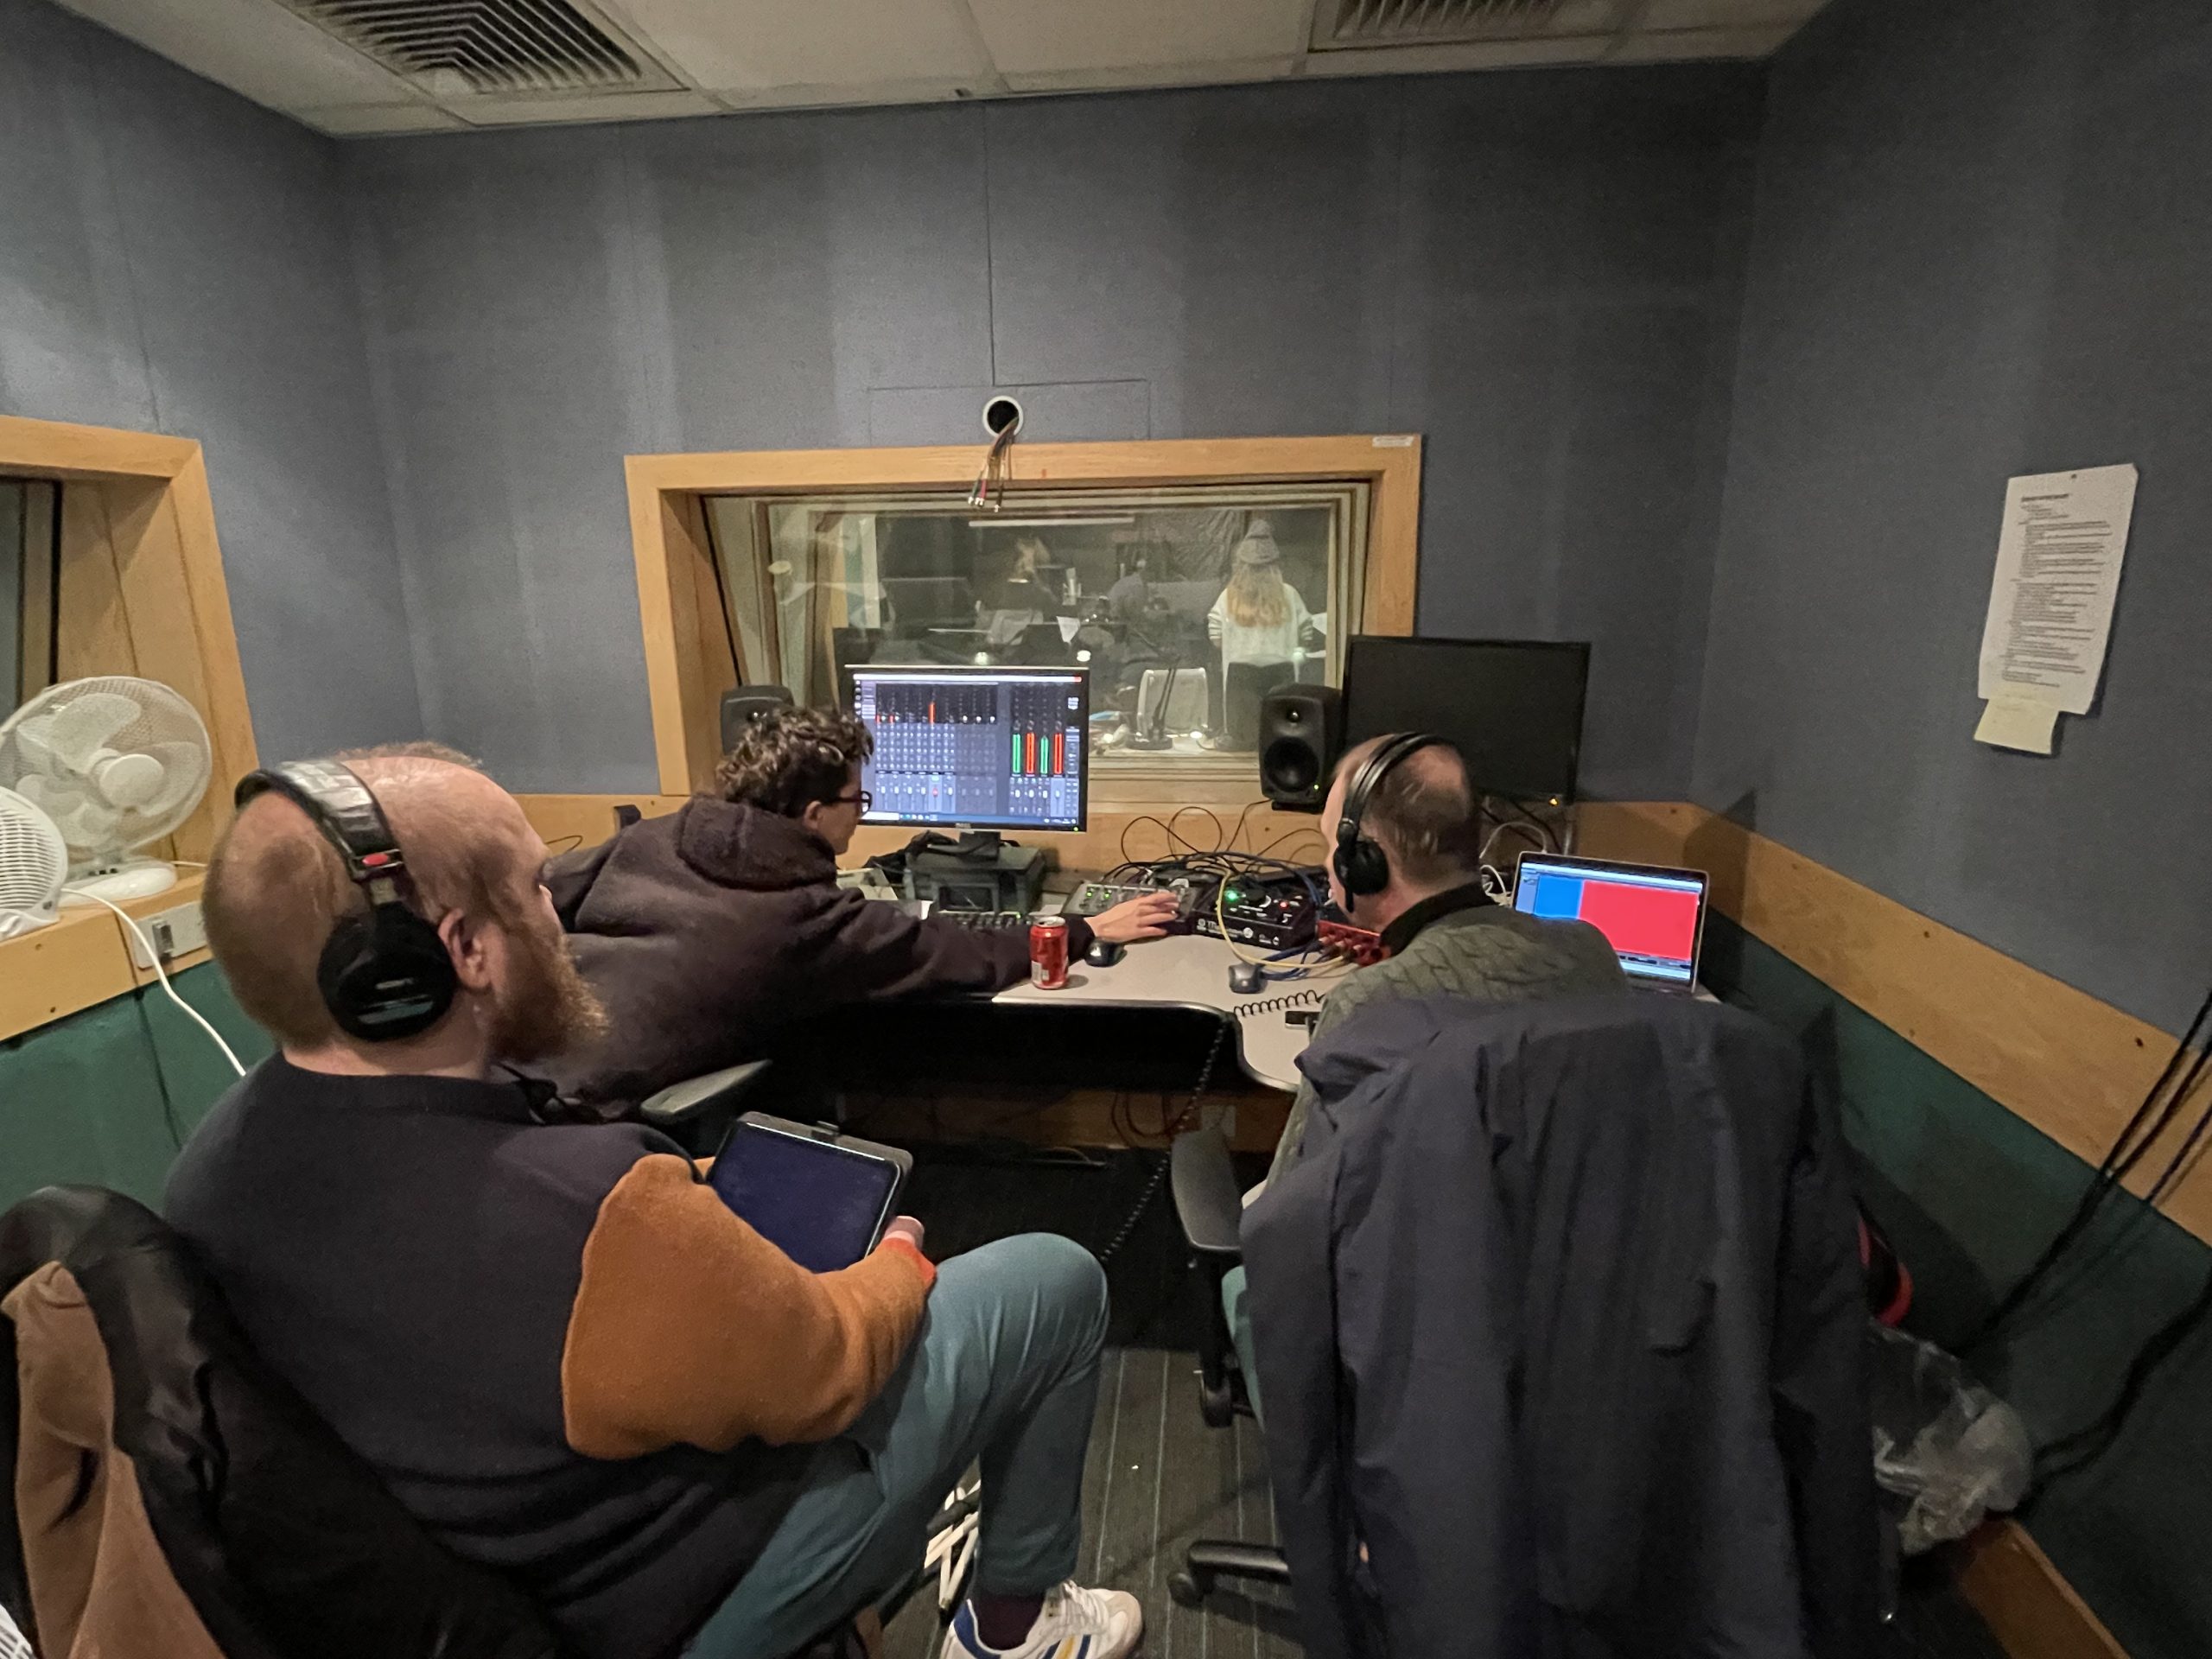 A photo from behind of three white people sitting at a recording studio desk. From the left, Ben is sat back wearing headphones and holding an Ipad, Han is leaning over and pressing a button and Ian is listening to the recording.